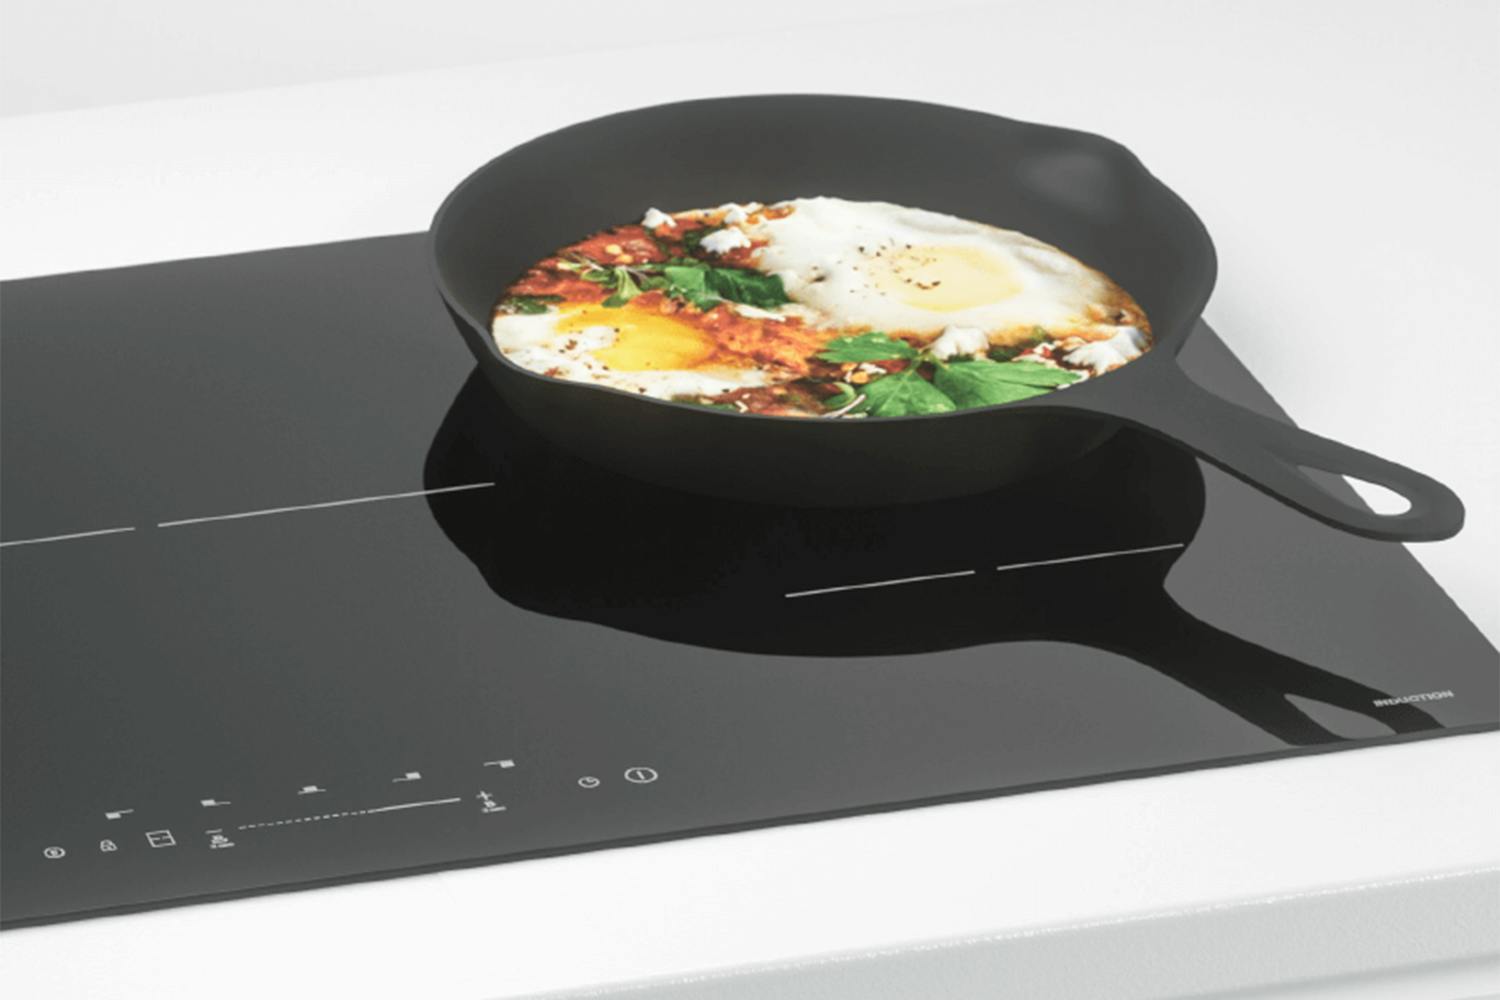 Haier 90cm Induction Cooktop